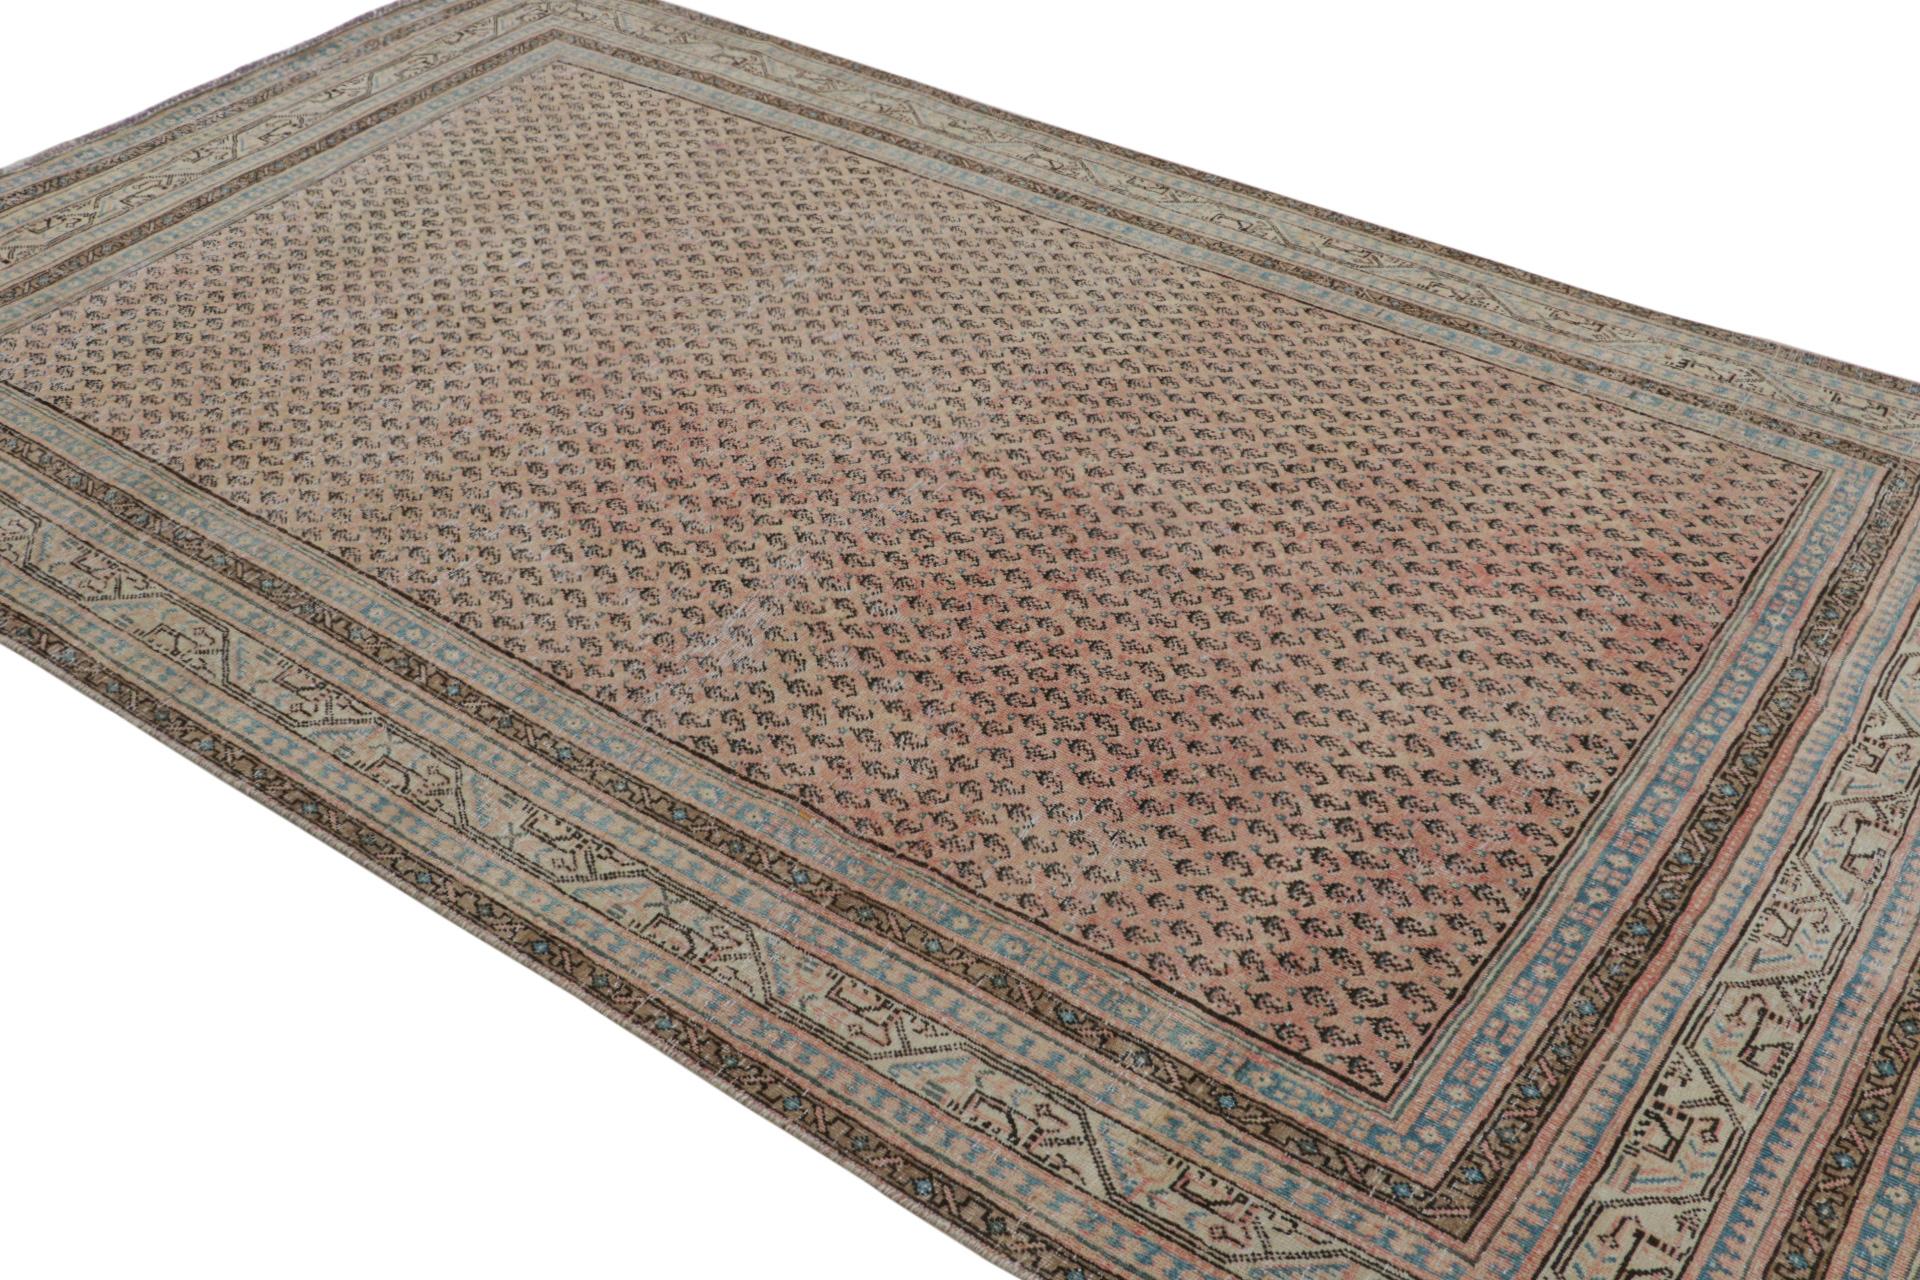 Hand knotted in wool on cotton, a 6x10 Persian Tabriz rug circa 1970-1980 - latest to join Rug & Kilim’s vintage selections.

On the Design:

The rug is overdyed and antique washed for gorgeous saturated colors and is quite a distressed beauty